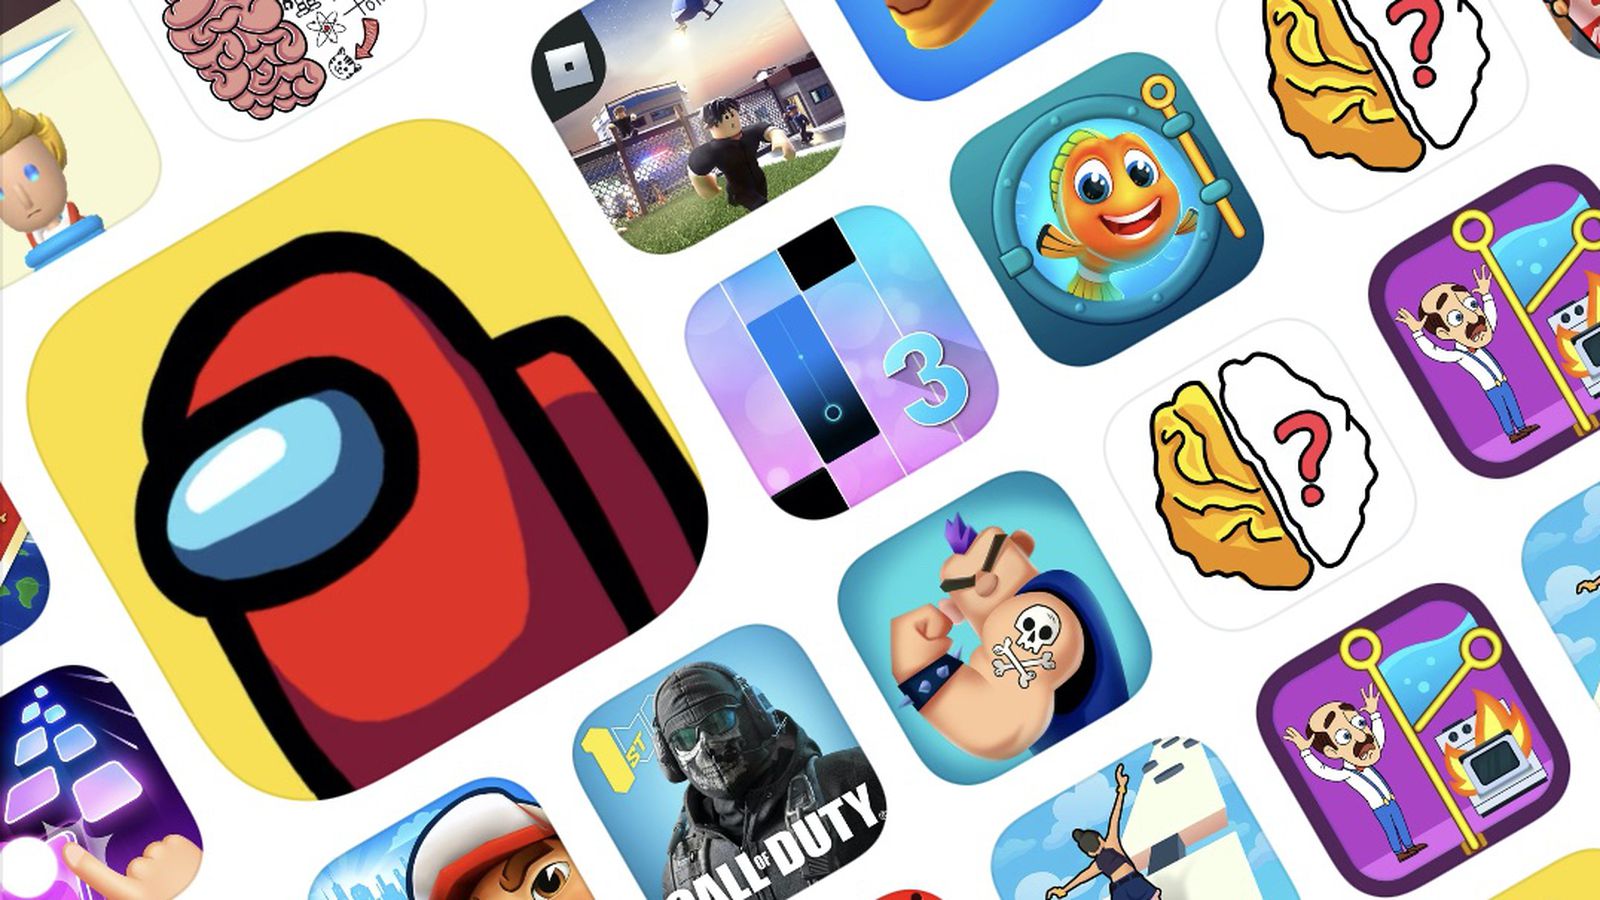 Why can't I download games anymore? - Apple Community